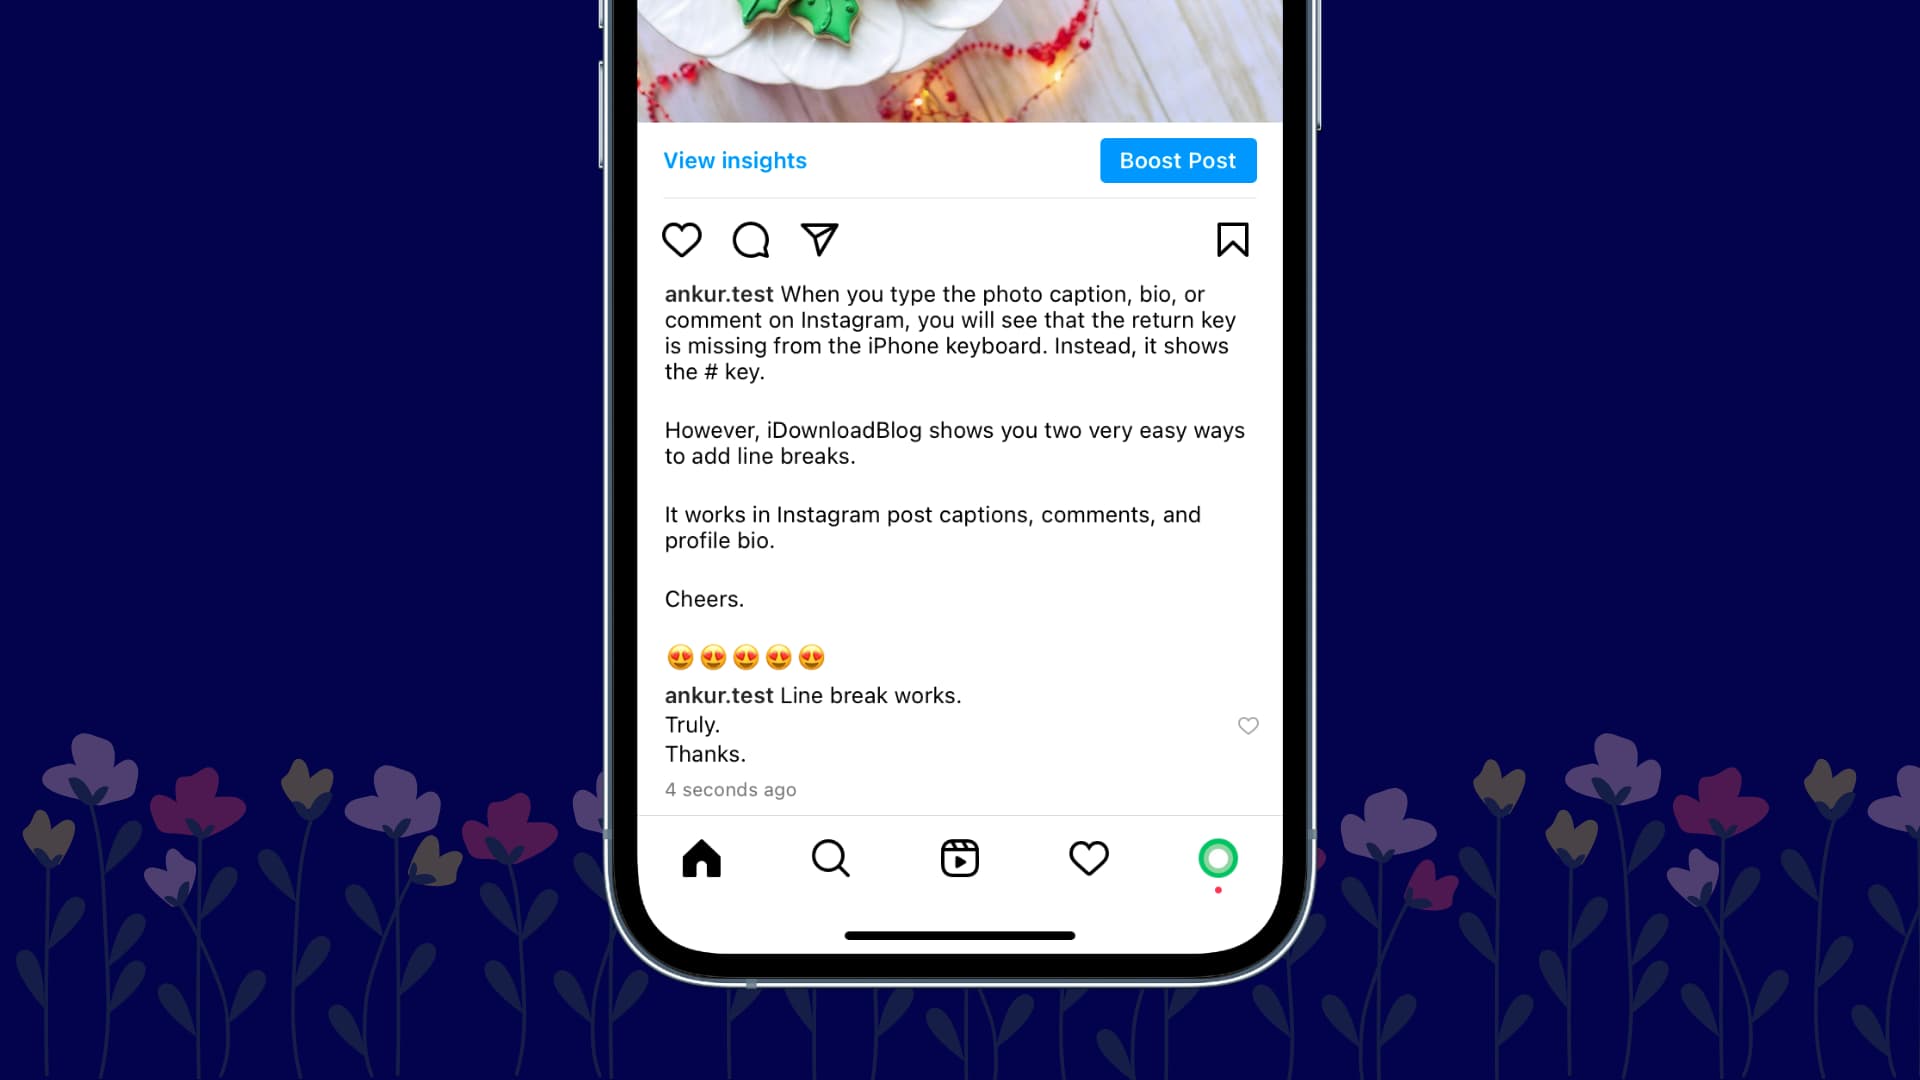 Add line break to Instagram post captions, comments, and profile bio from iPhone